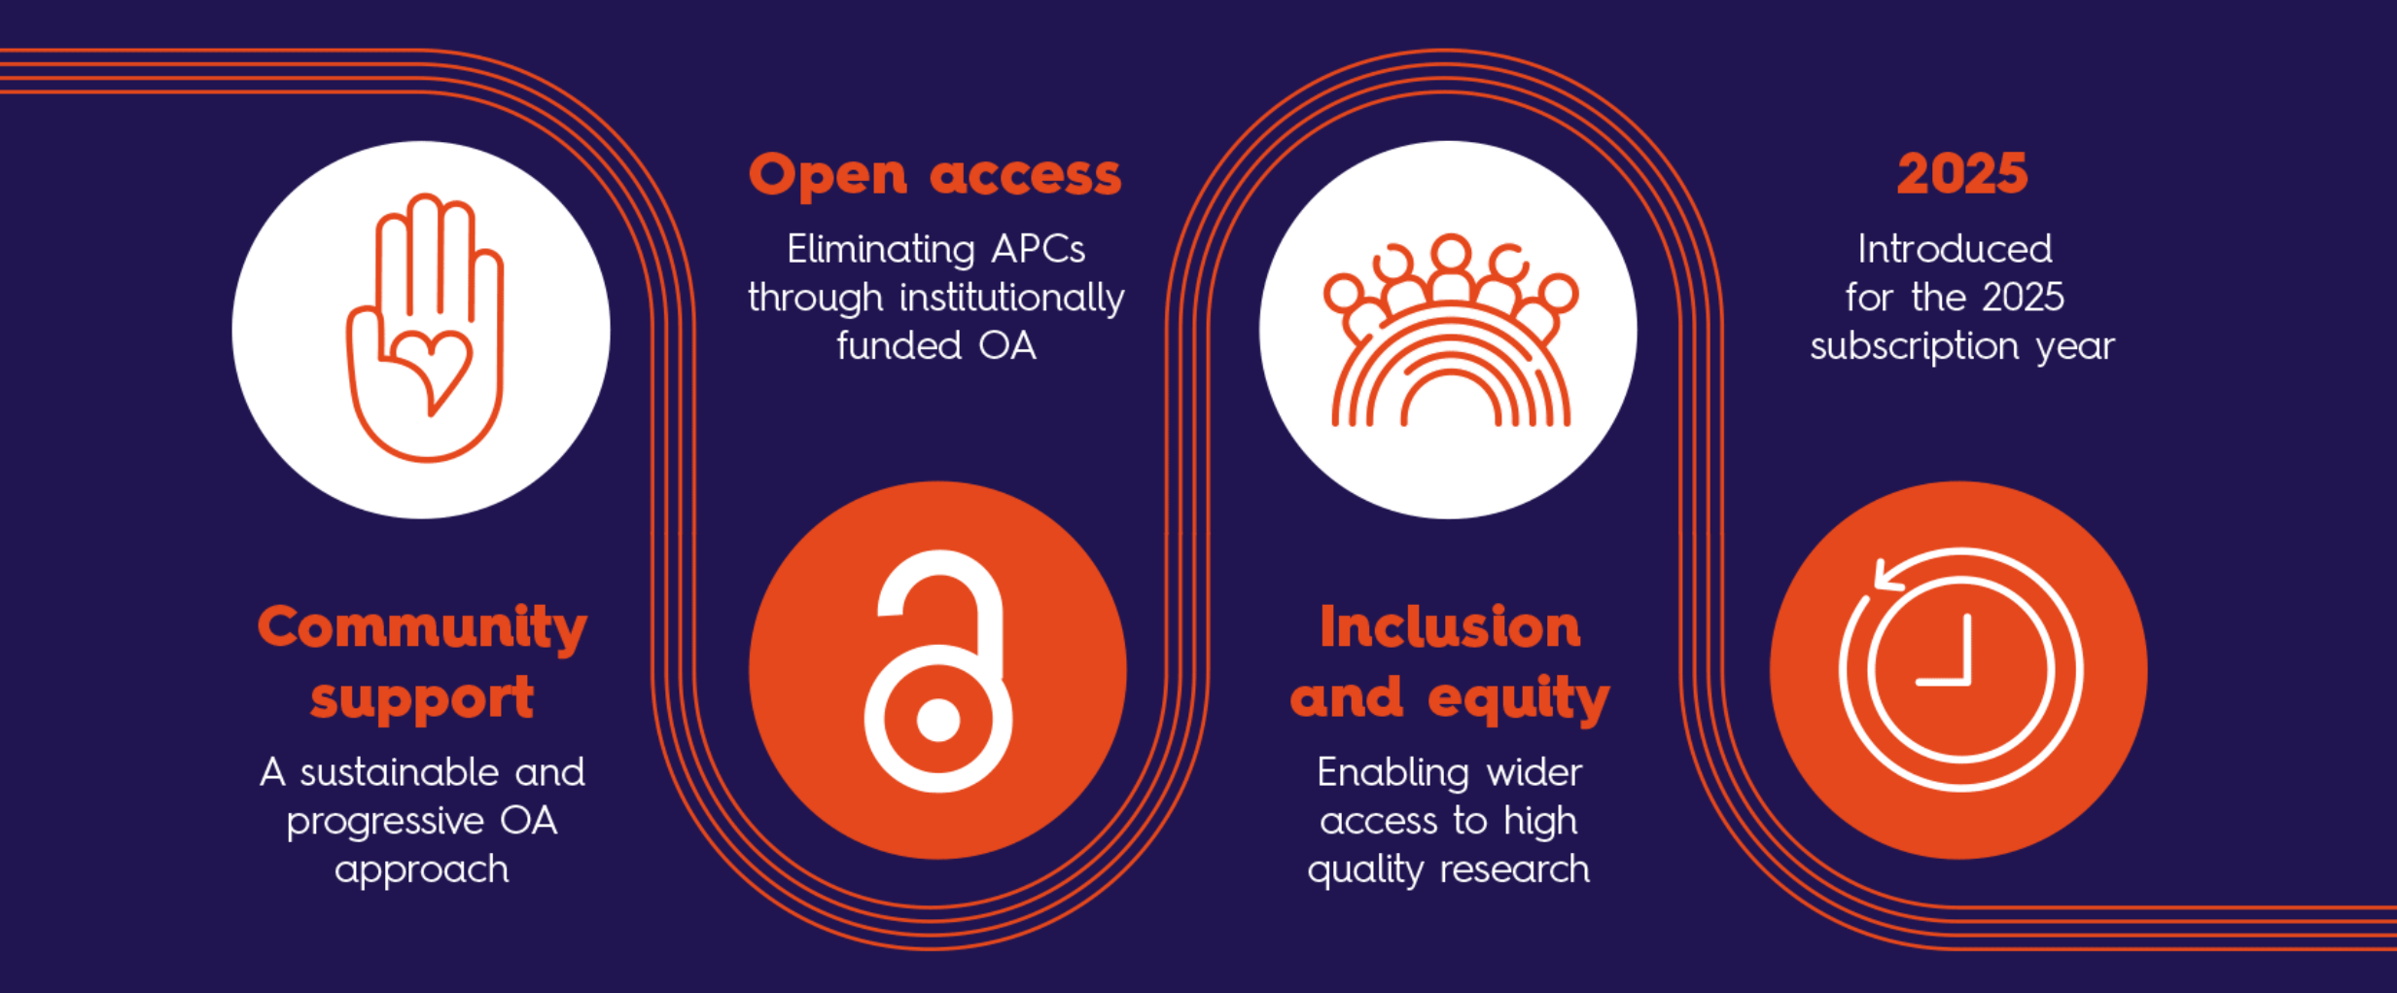 Community support, open access, inclusion and equity, 2025